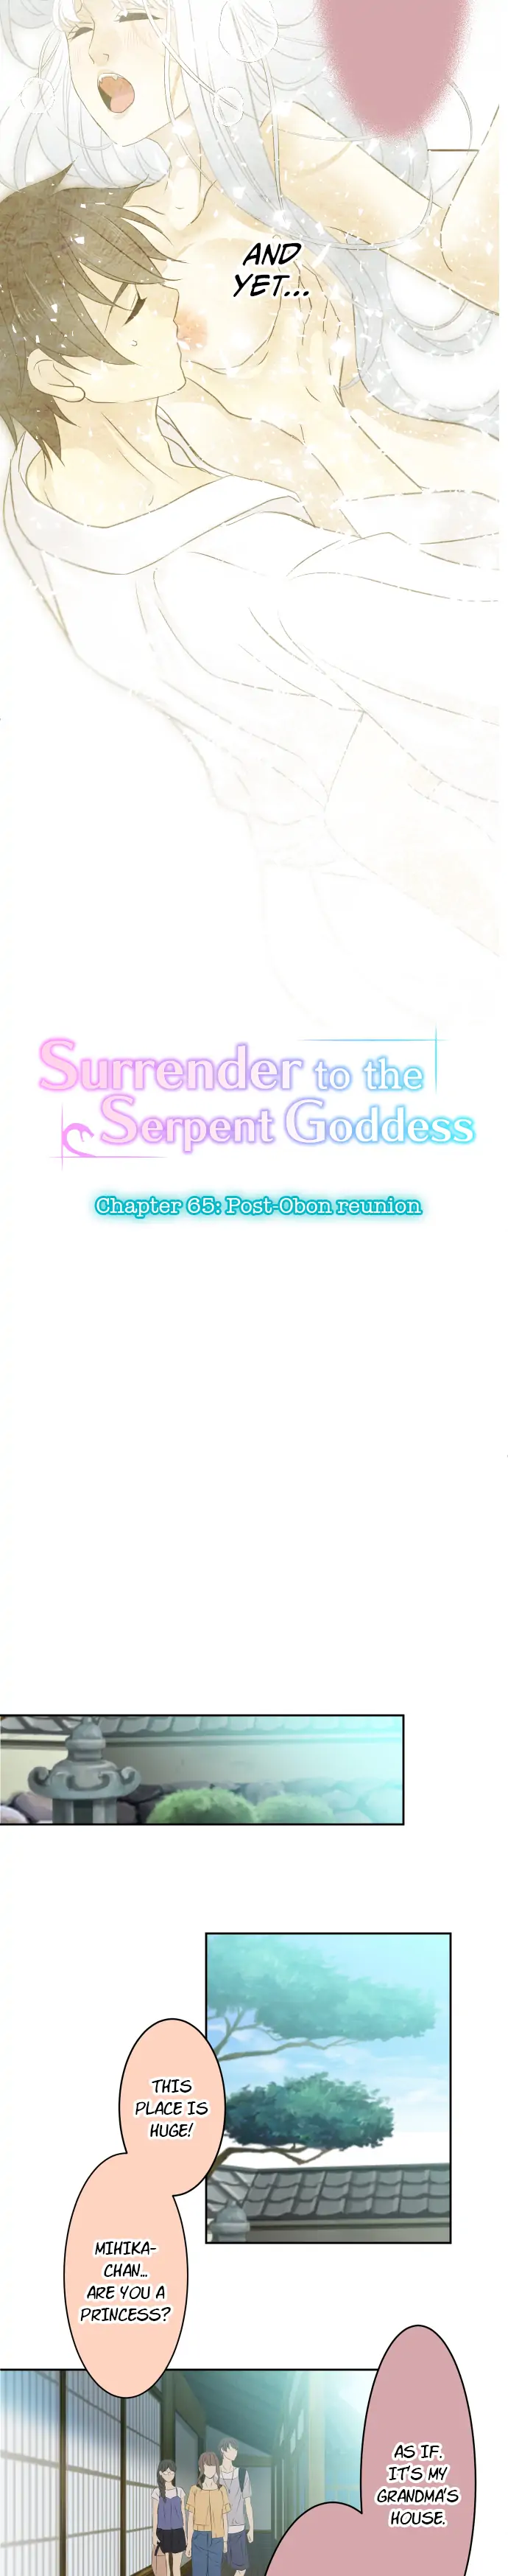 Surrender To The Serpent Goddess - Page 2